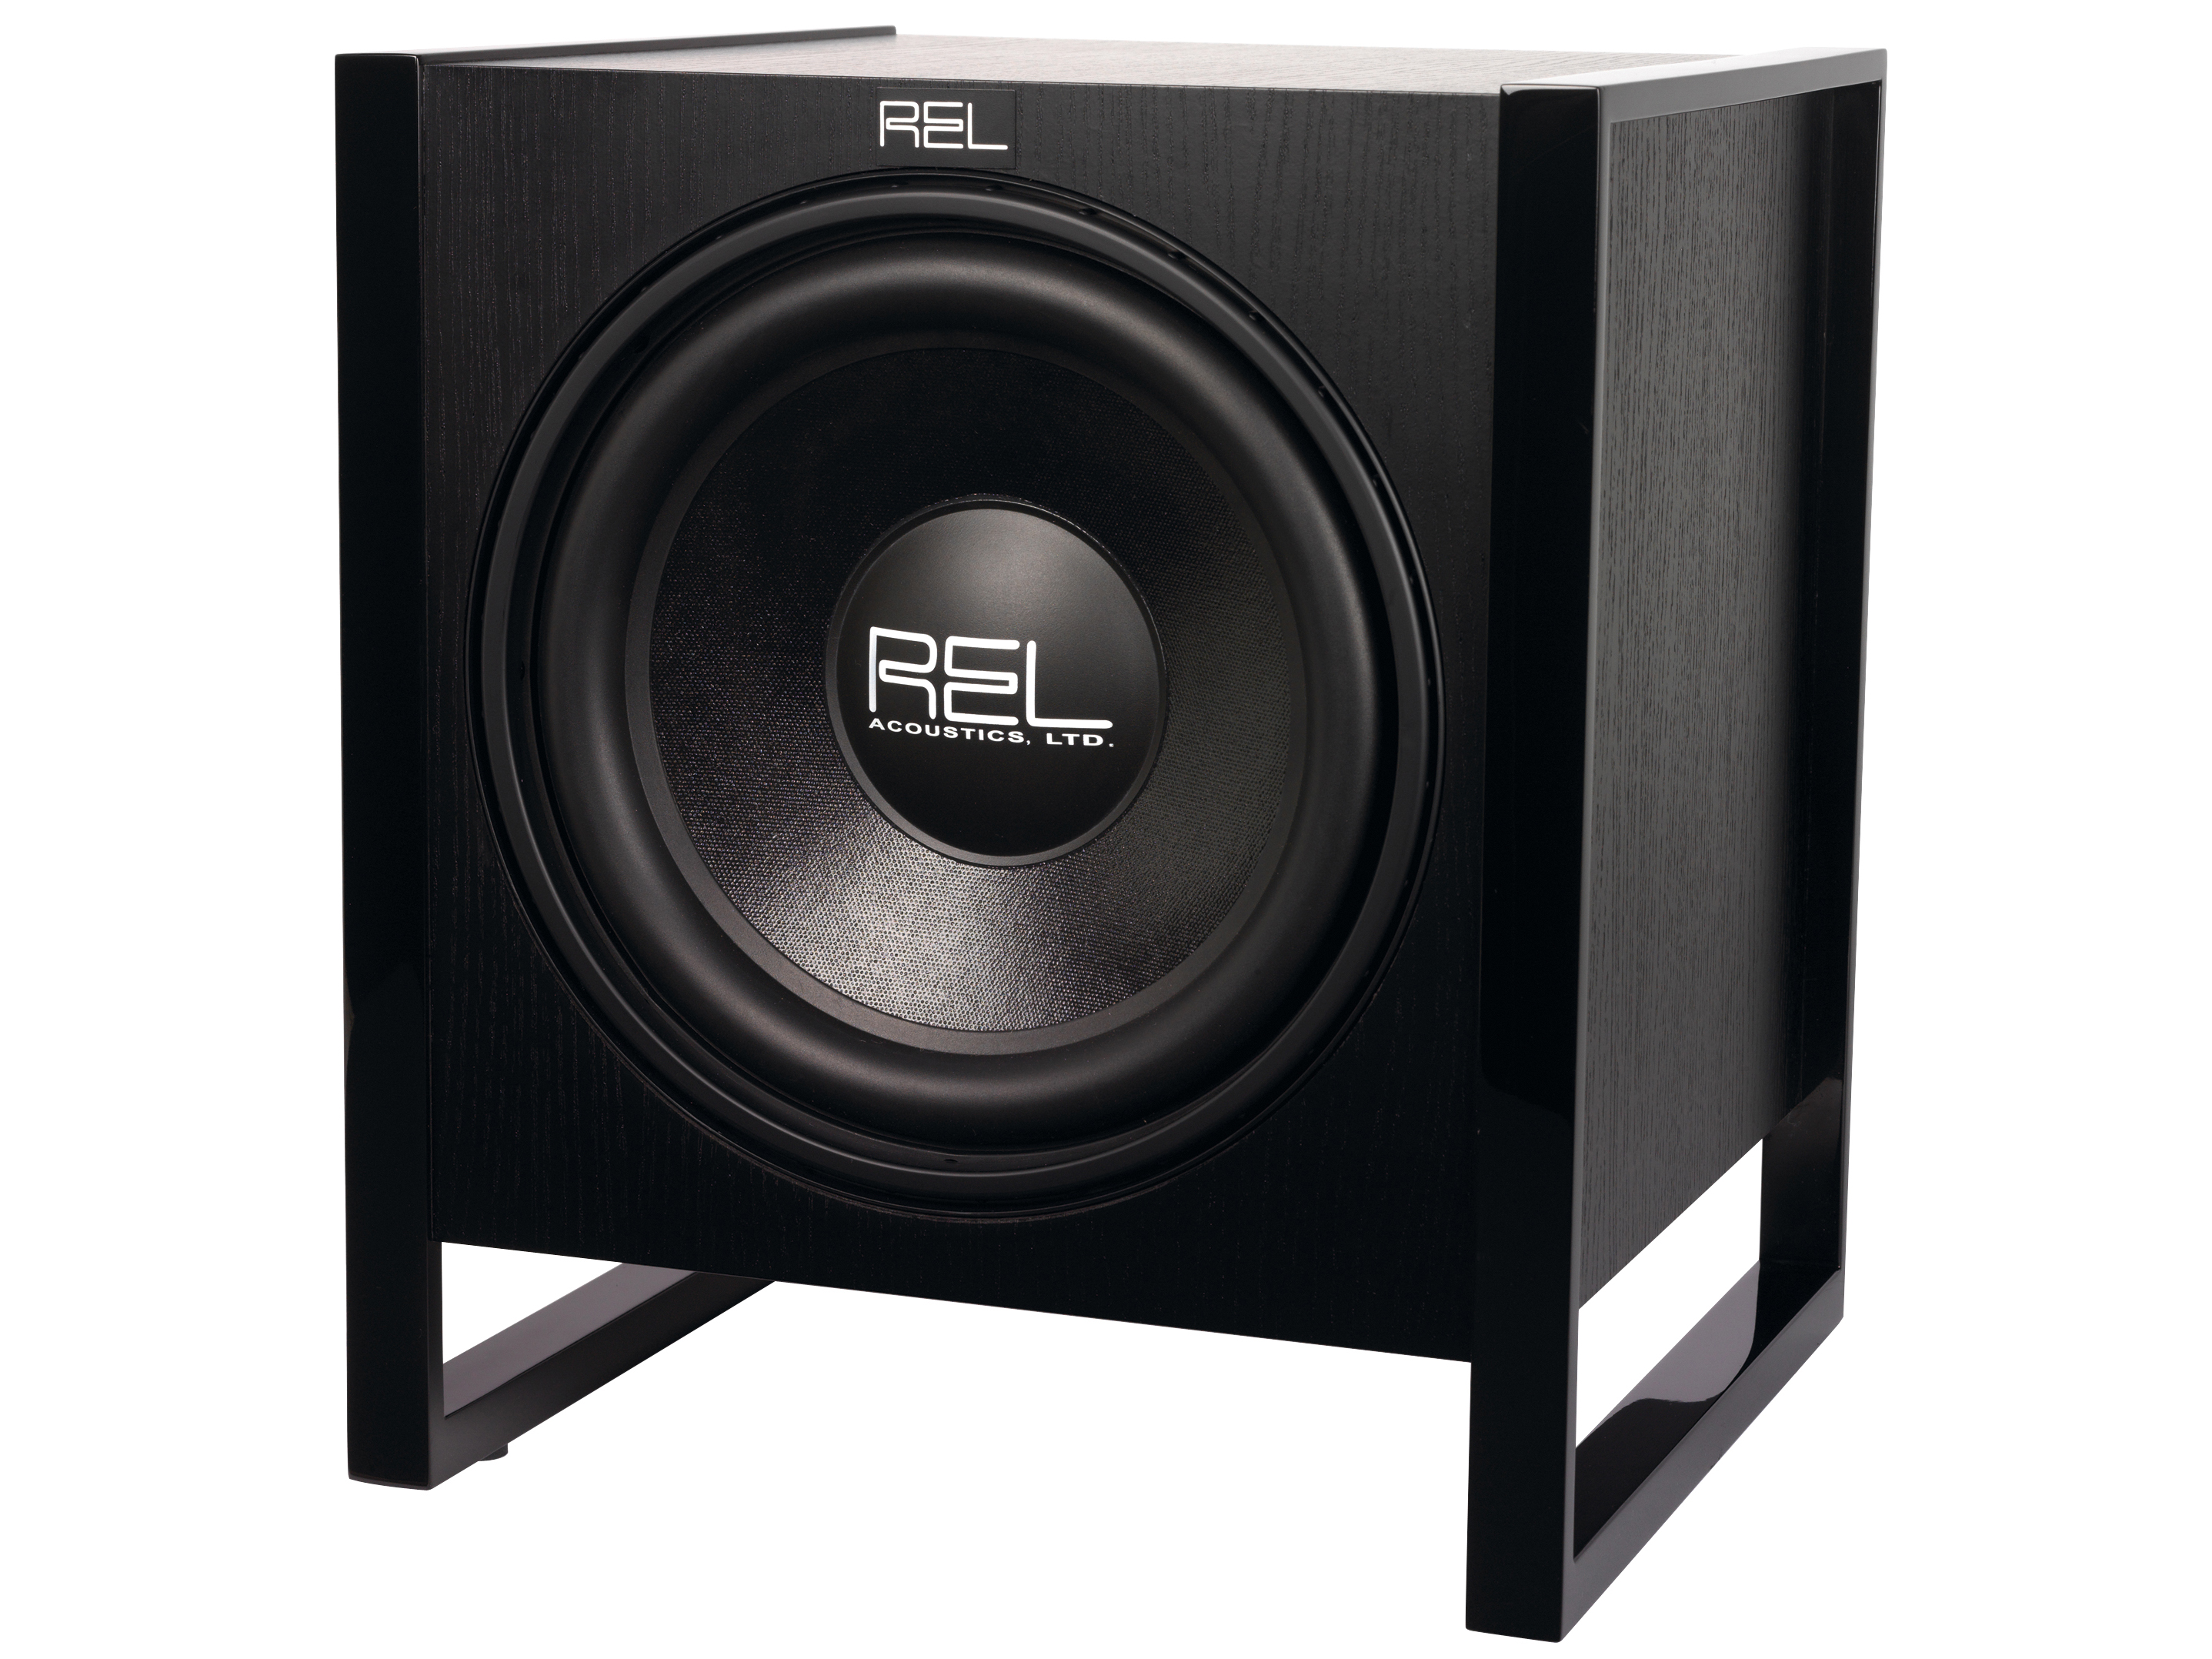 T2 subwoofer review |